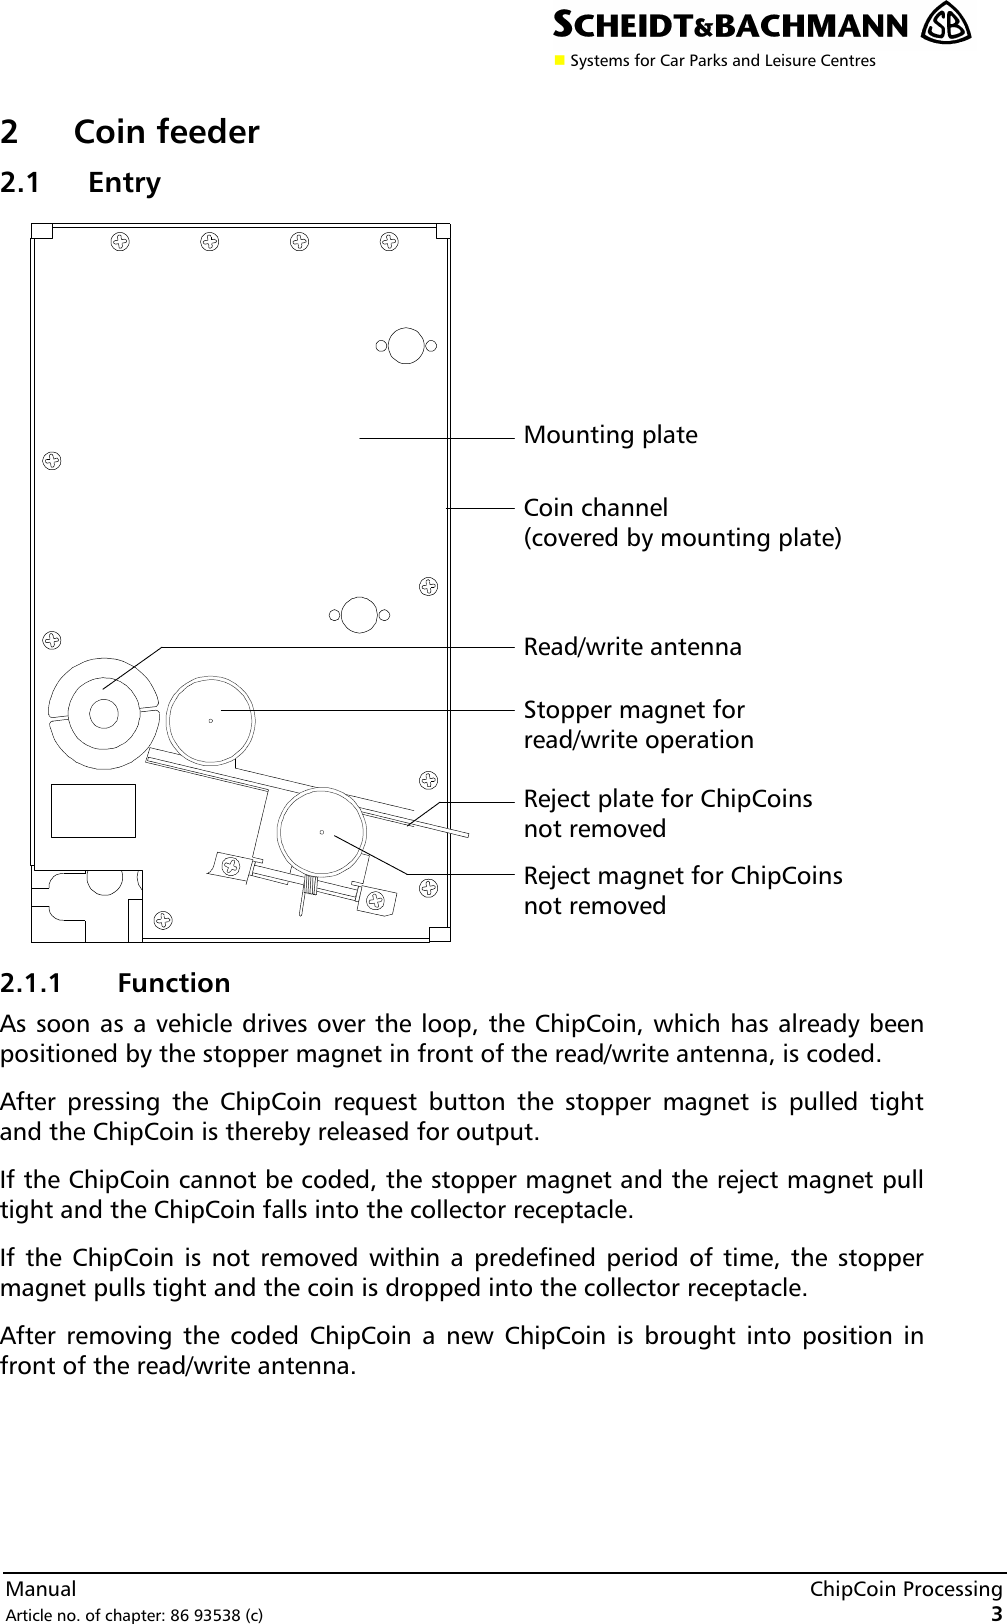 n Systems for Car Parks and Leisure CentresManual ChipCoin ProcessingArticle no. of chapter: 86 93538 (c) 32Coin feeder2.1 Entry2.1.1 FunctionAs soon as a vehicle drives over the loop, the ChipCoin, which has already beenpositioned by the stopper magnet in front of the read/write antenna, is coded.After pressing the ChipCoin request button the stopper magnet is pulled tightand the ChipCoin is thereby released for output.If the ChipCoin cannot be coded, the stopper magnet and the reject magnet pulltight and the ChipCoin falls into the collector receptacle.If the ChipCoin is not removed within a predefined period of time, the stoppermagnet pulls tight and the coin is dropped into the collector receptacle.After removing the coded ChipCoin a new ChipCoin is brought into position infront of the read/write antenna.Reject magnet for ChipCoinsnot removedRead/write antennaStopper magnet forread/write operationReject plate for ChipCoinsnot removedMounting plateCoin channel(covered by mounting plate)